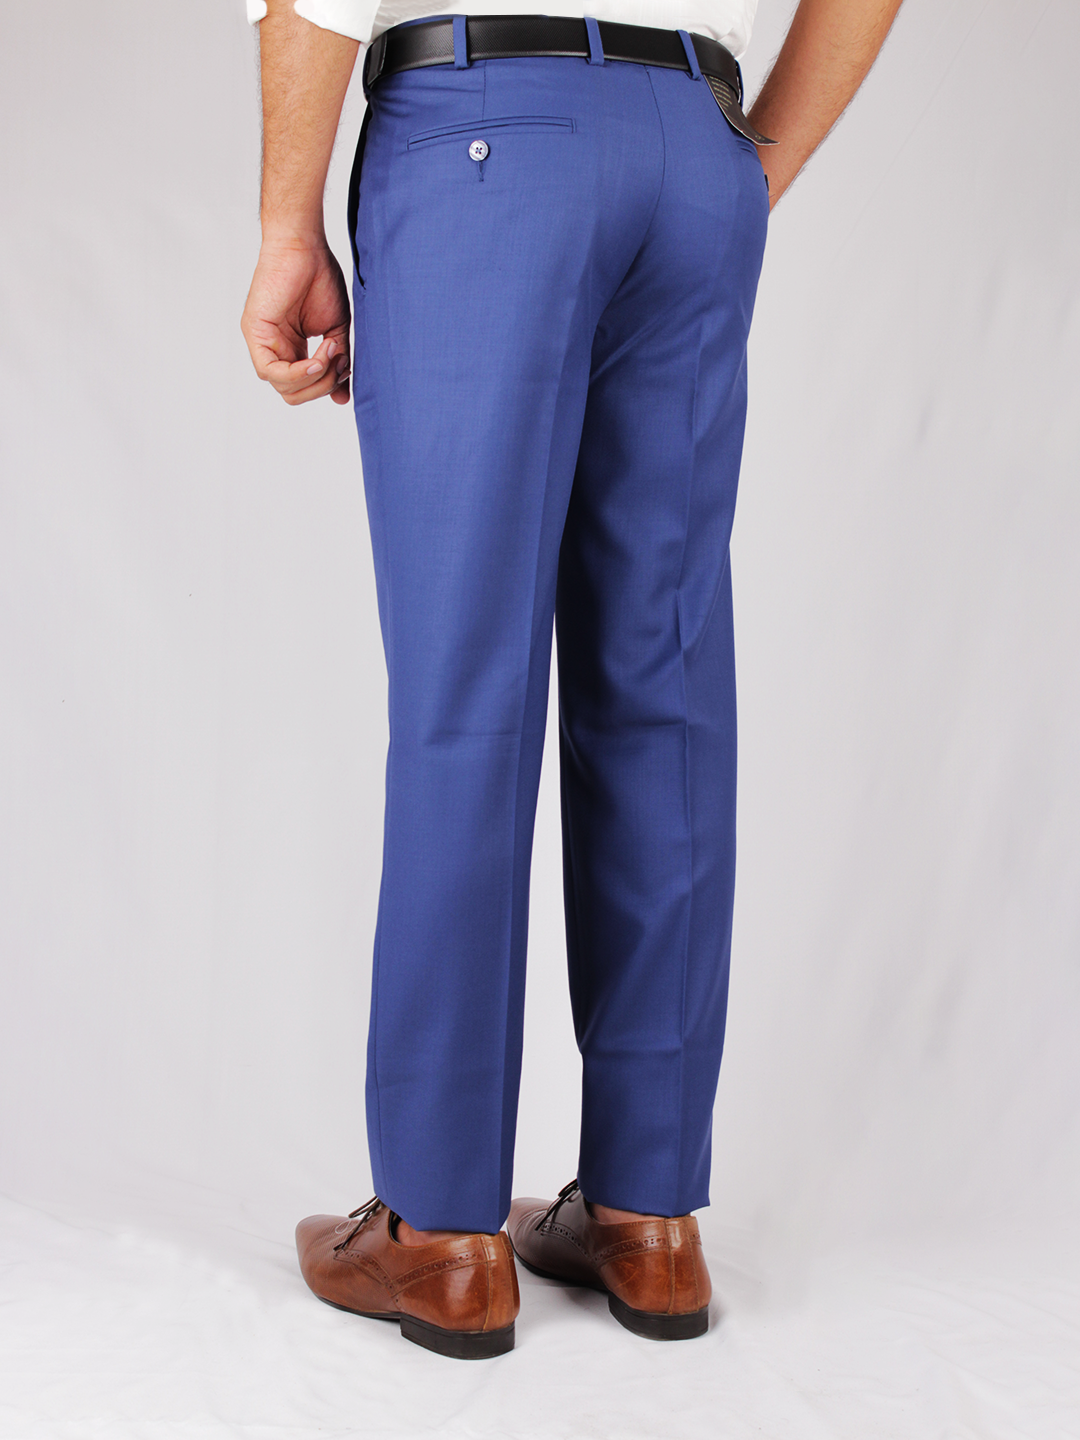 Buy Men's Suede Blue Color Trouser @Tailorman Custom Made Ready To Wear  Trousers